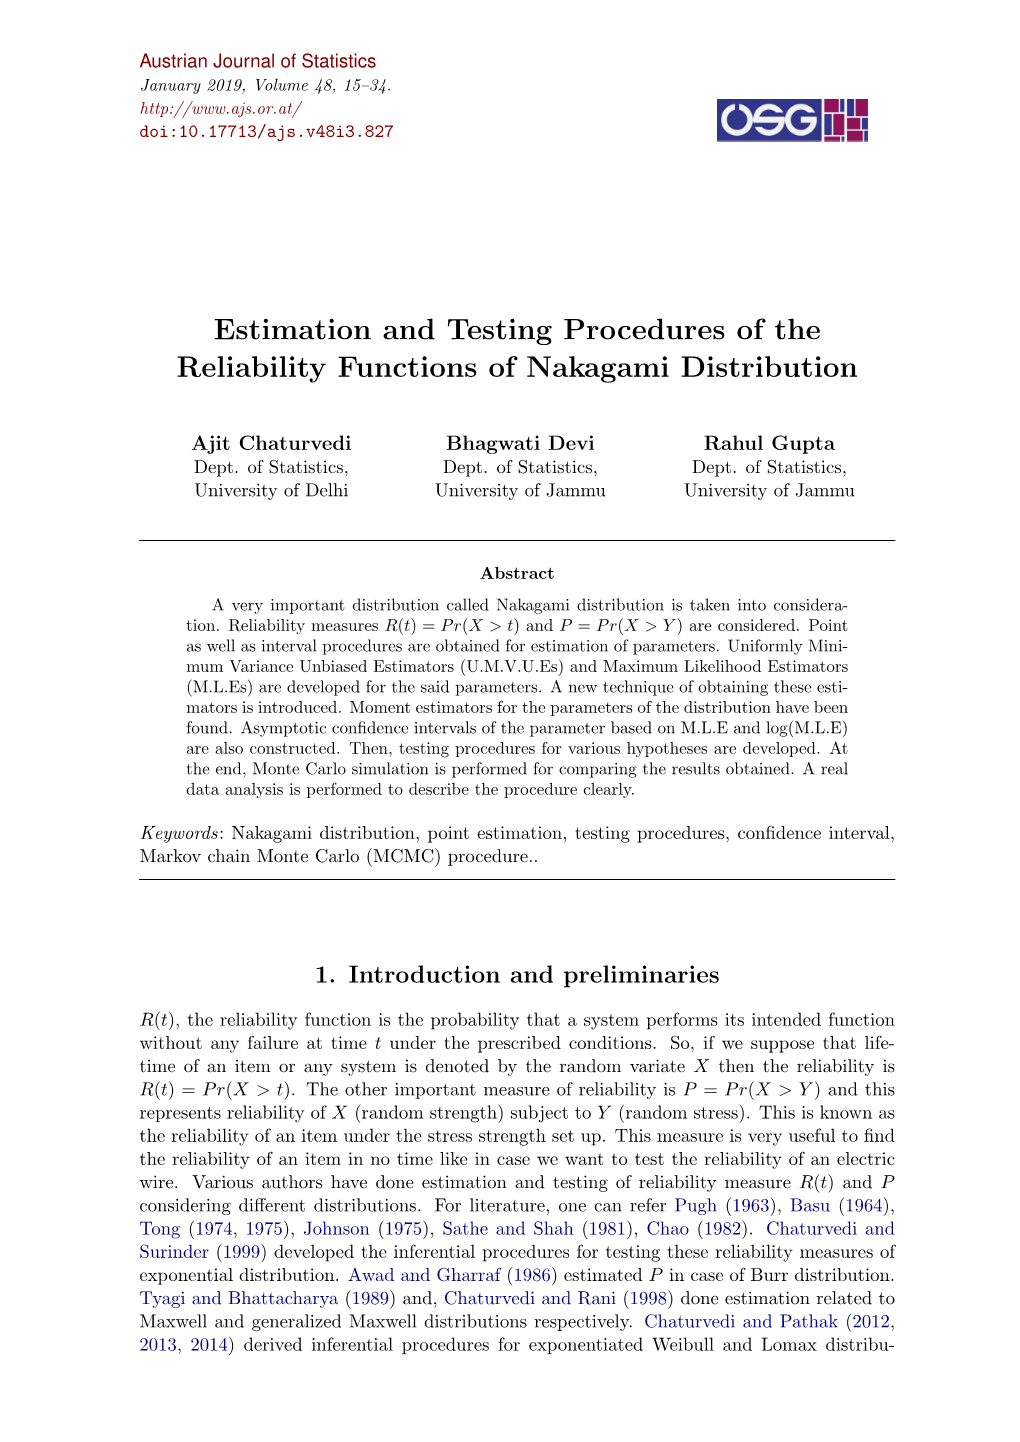 Estimation and Testing Procedures of the Reliability Functions of Nakagami Distribution